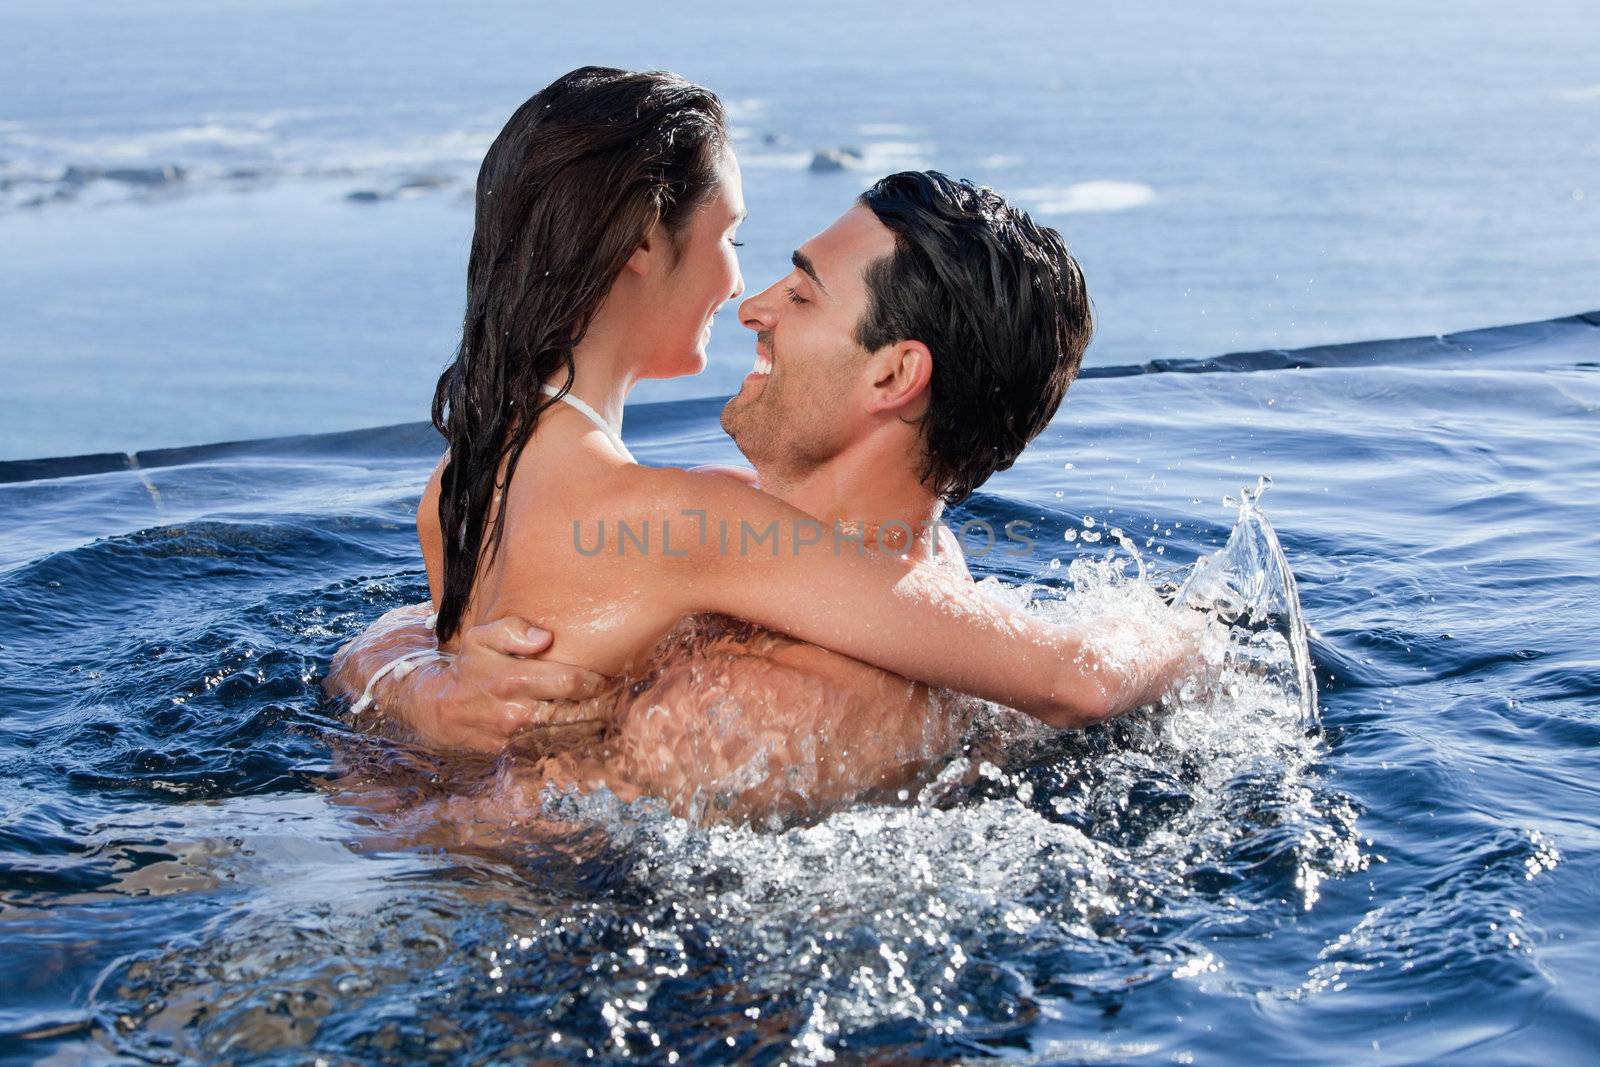 Joyful couple cuddling each other in a swimming pool